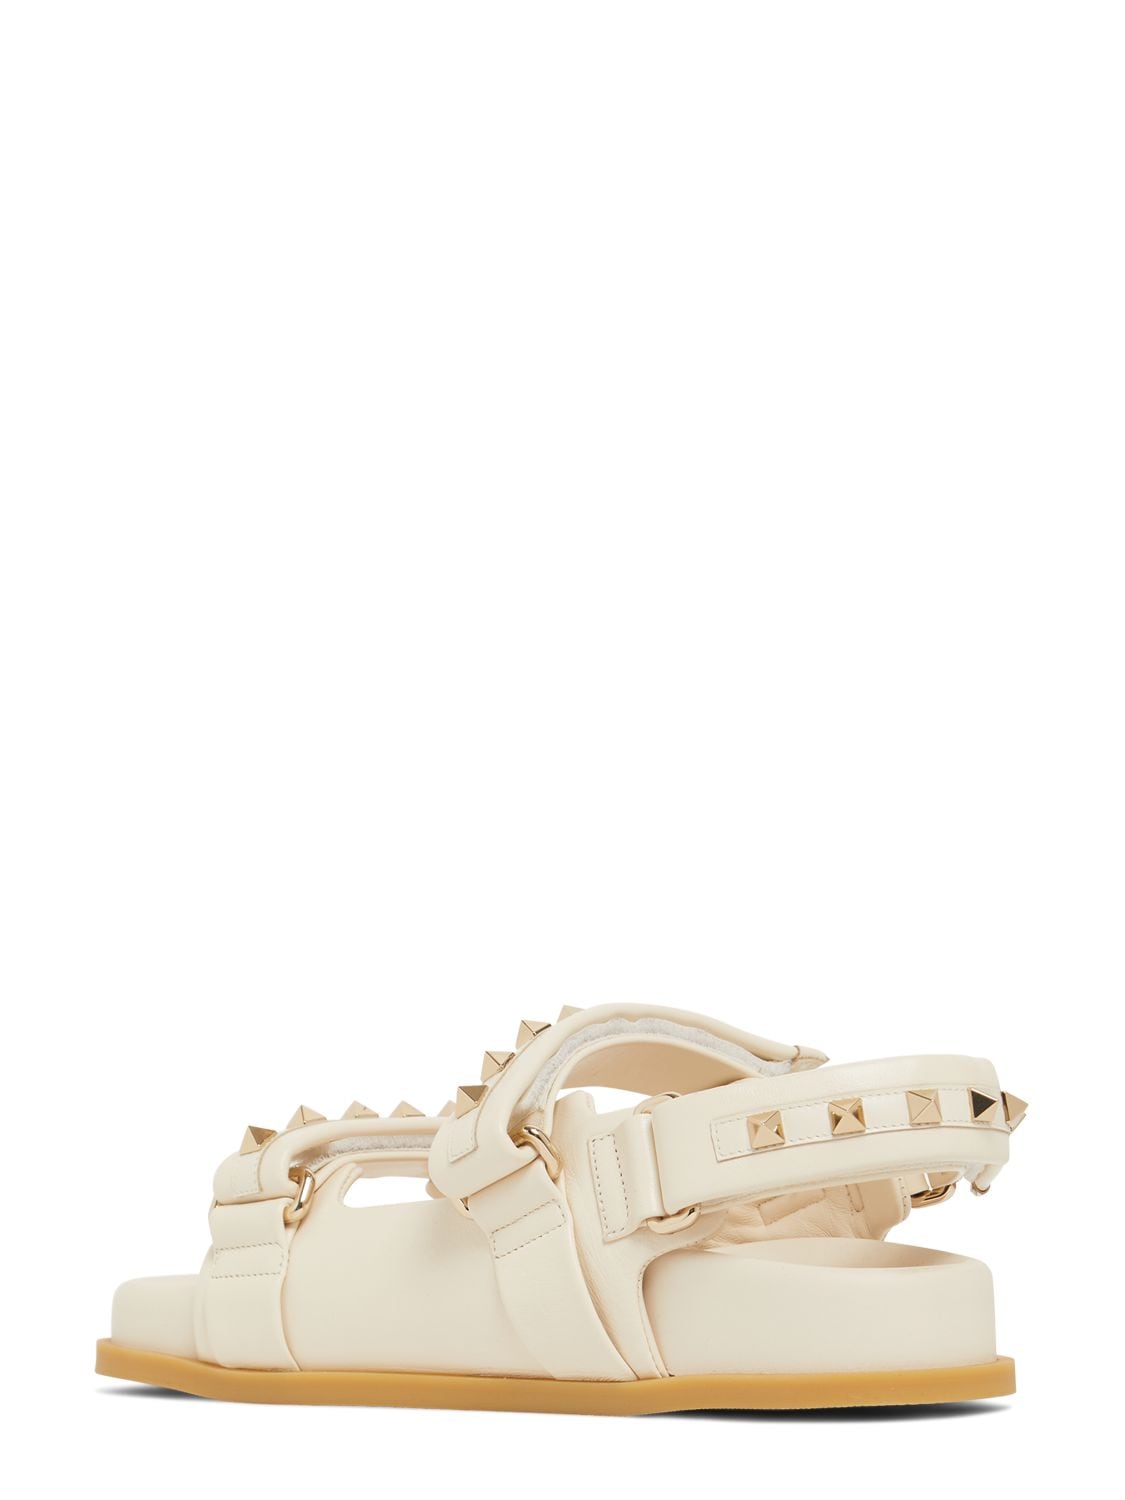 Shop Valentino 10mm Rockstud Leather Flats In Light Ivory